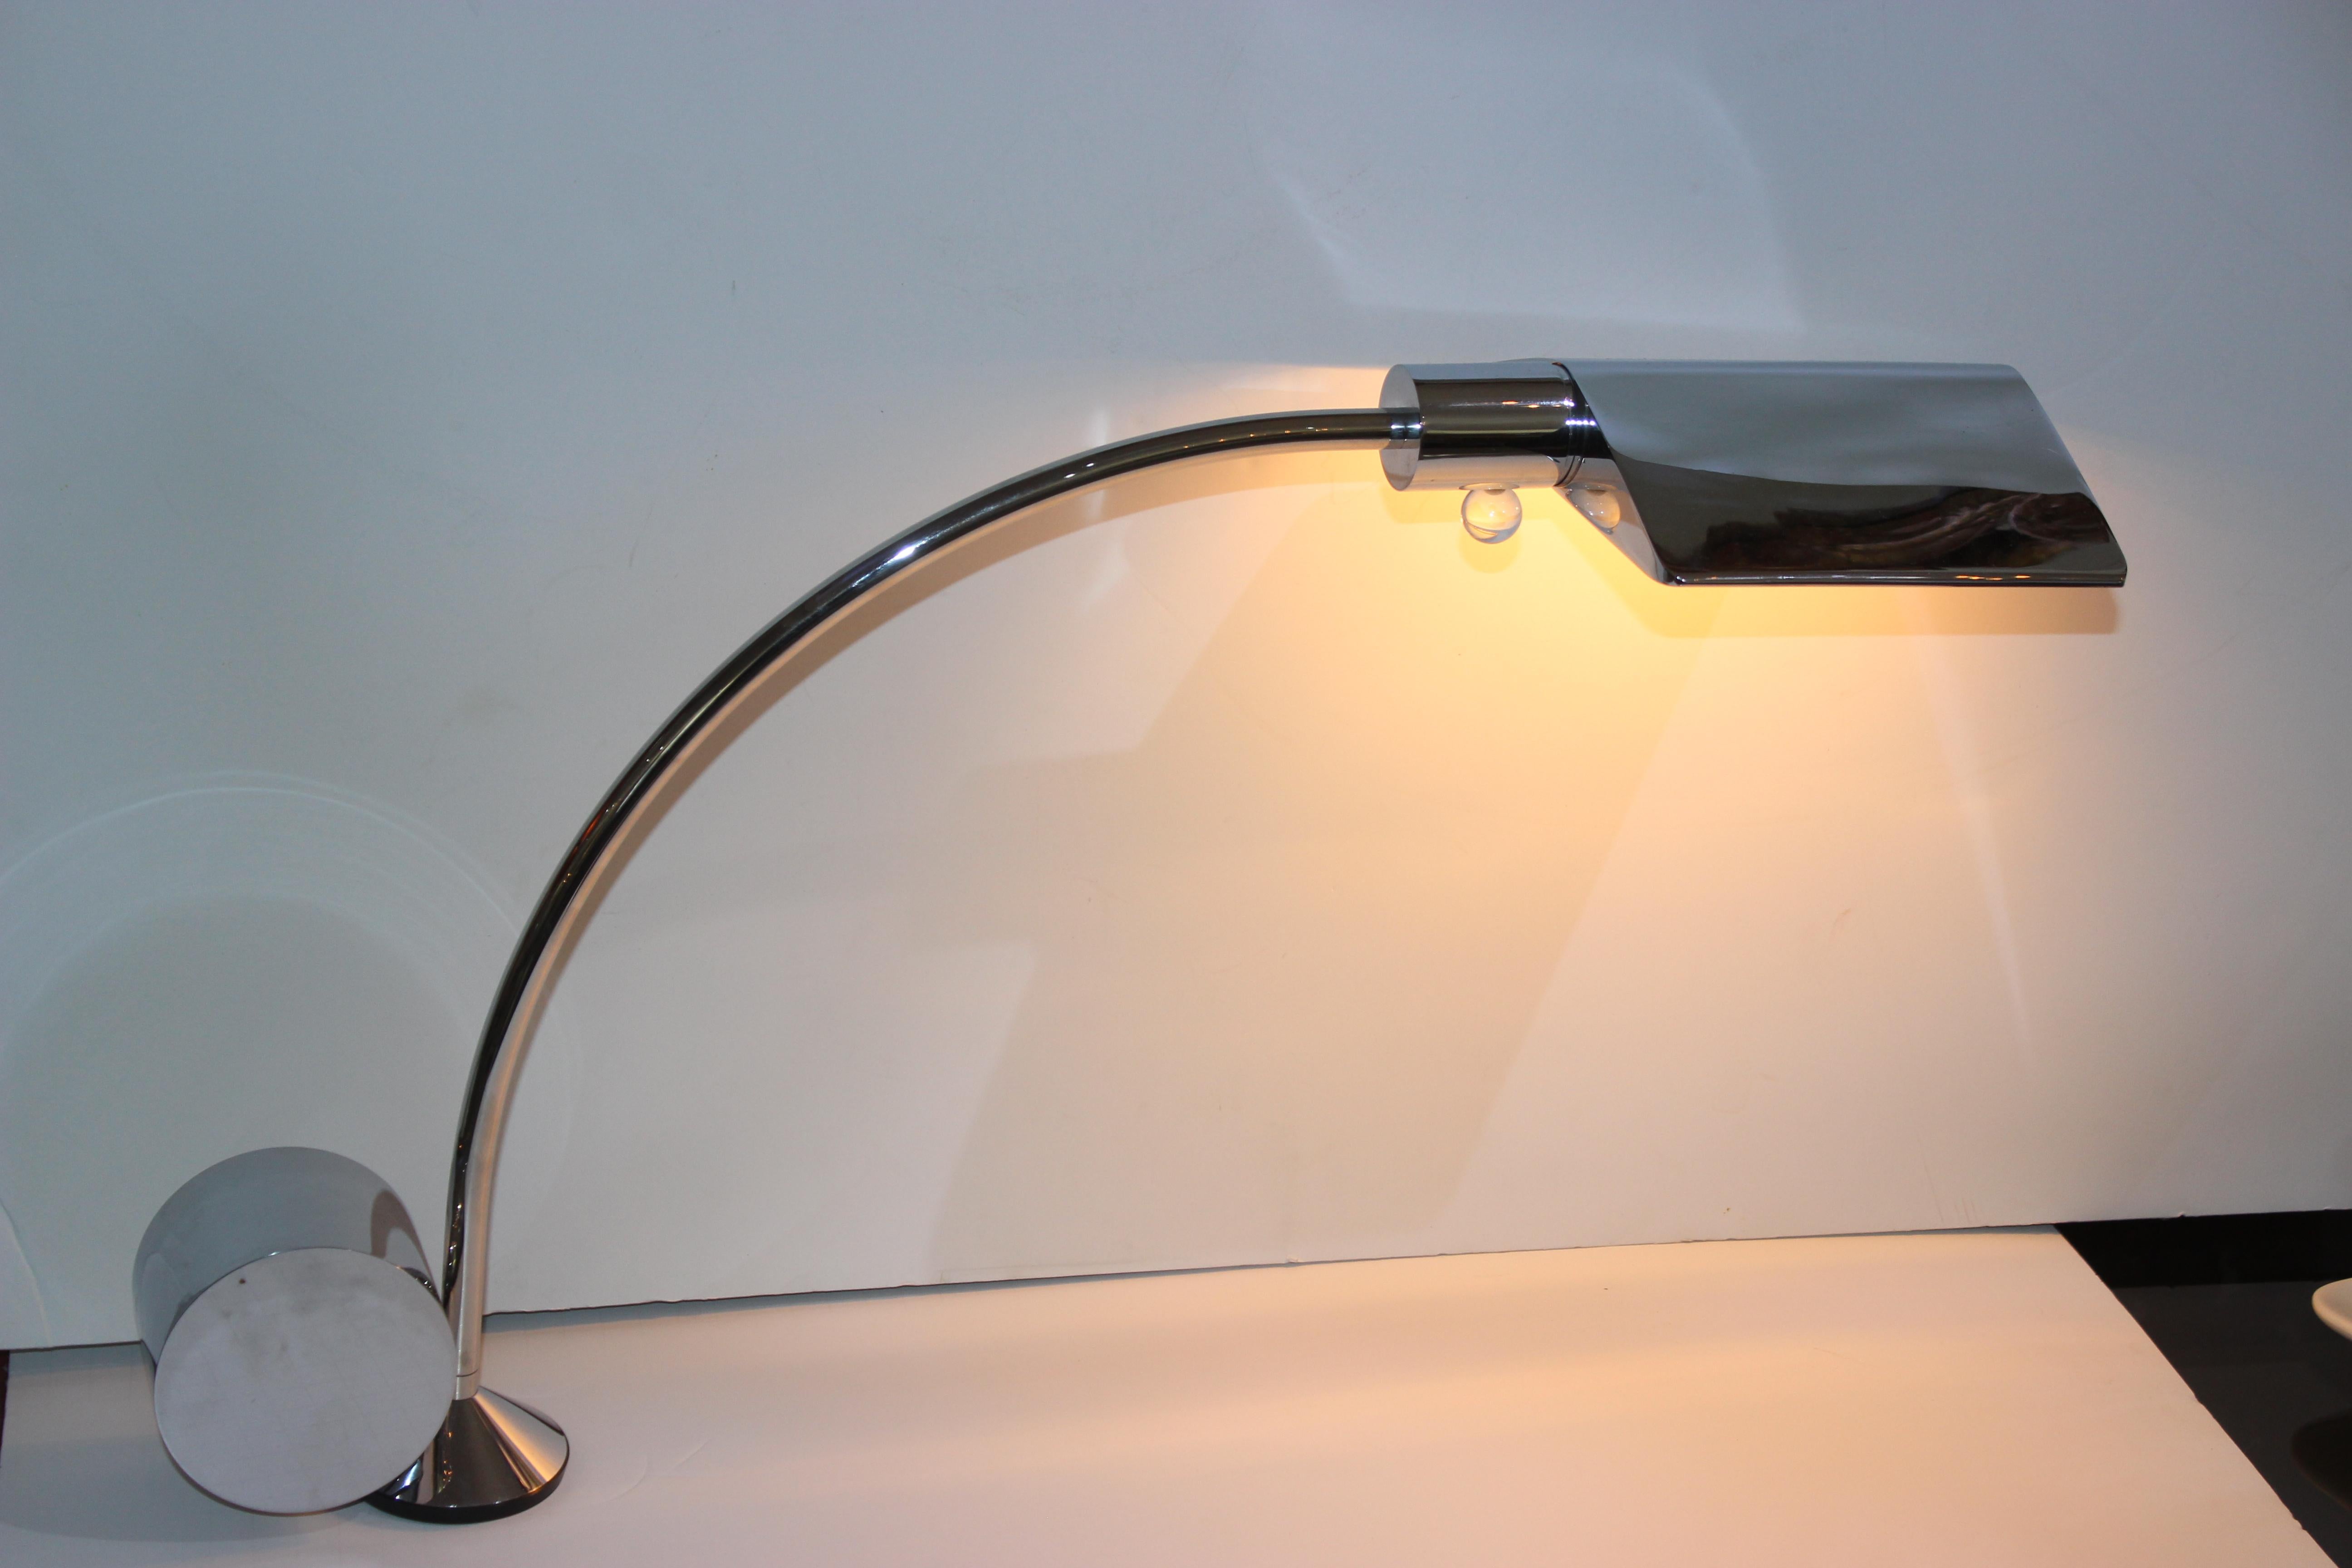 This stylish and rare polished chrome cantelevered table lamp by Cedric Hartman is know as the 